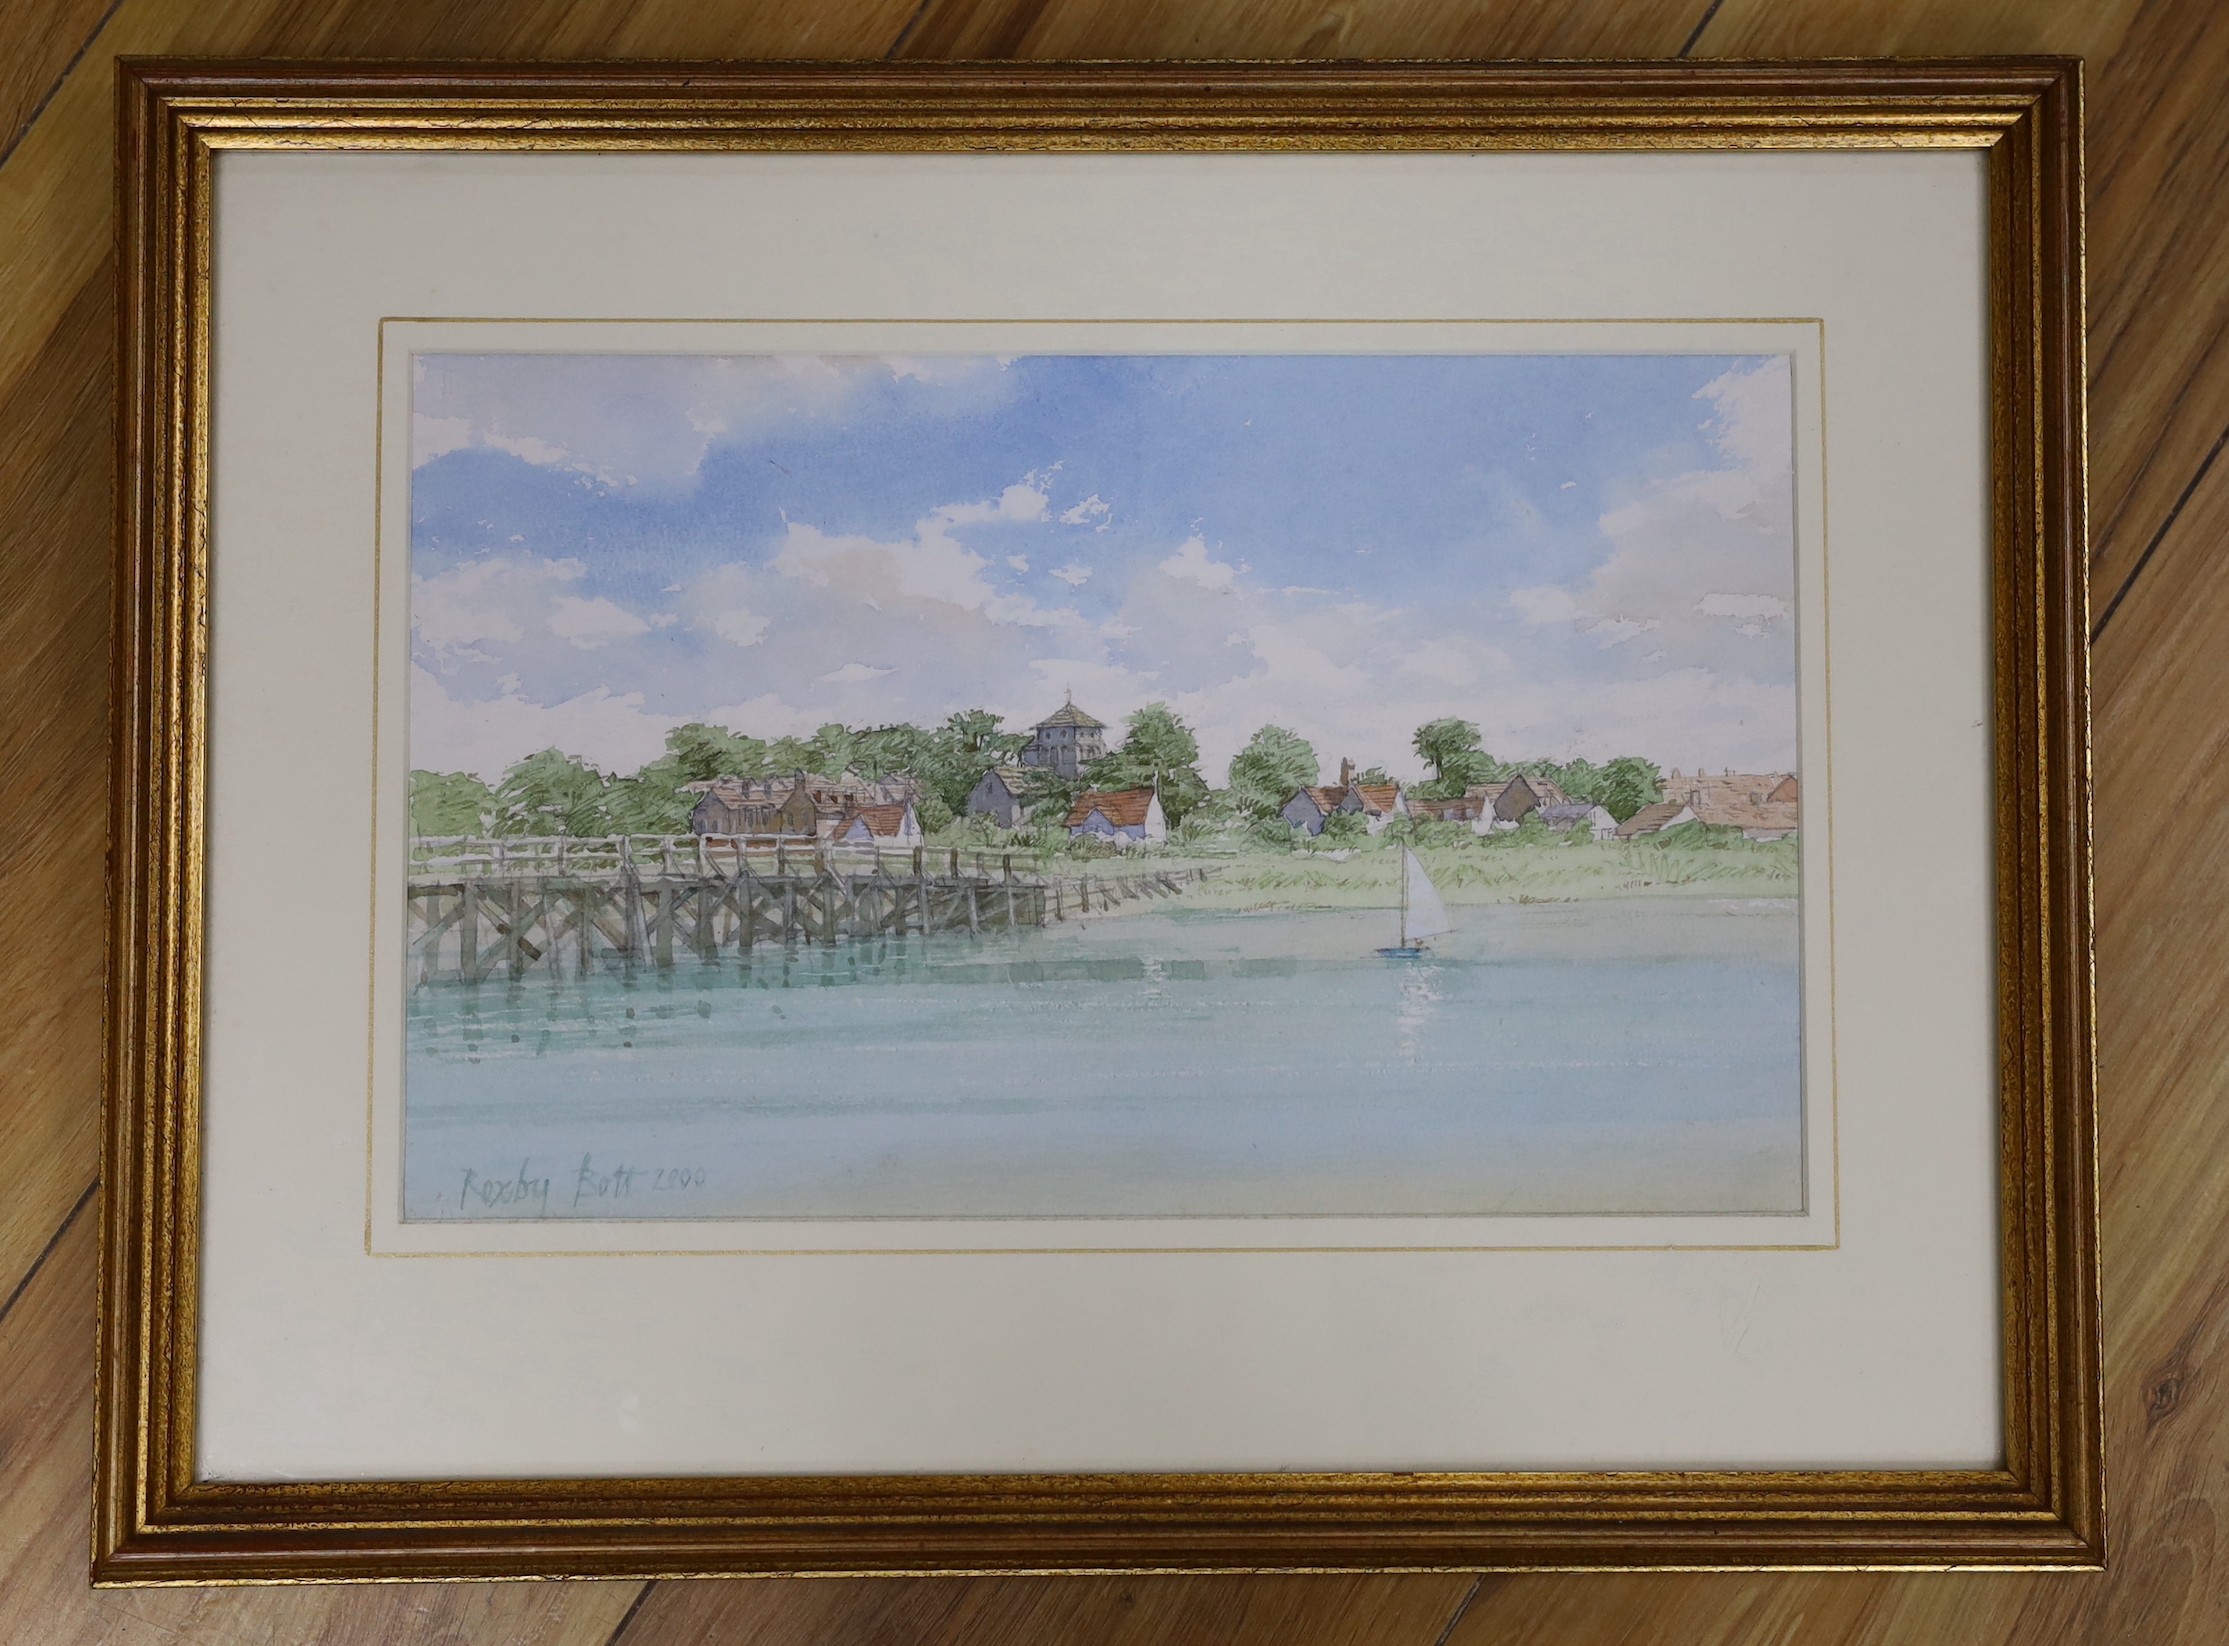 Dennis Roxby-Bott (b.1948), watercolour, 'The Old Bridge, Shoreham by Sea', signed and dated 2000, 20 x 32cm